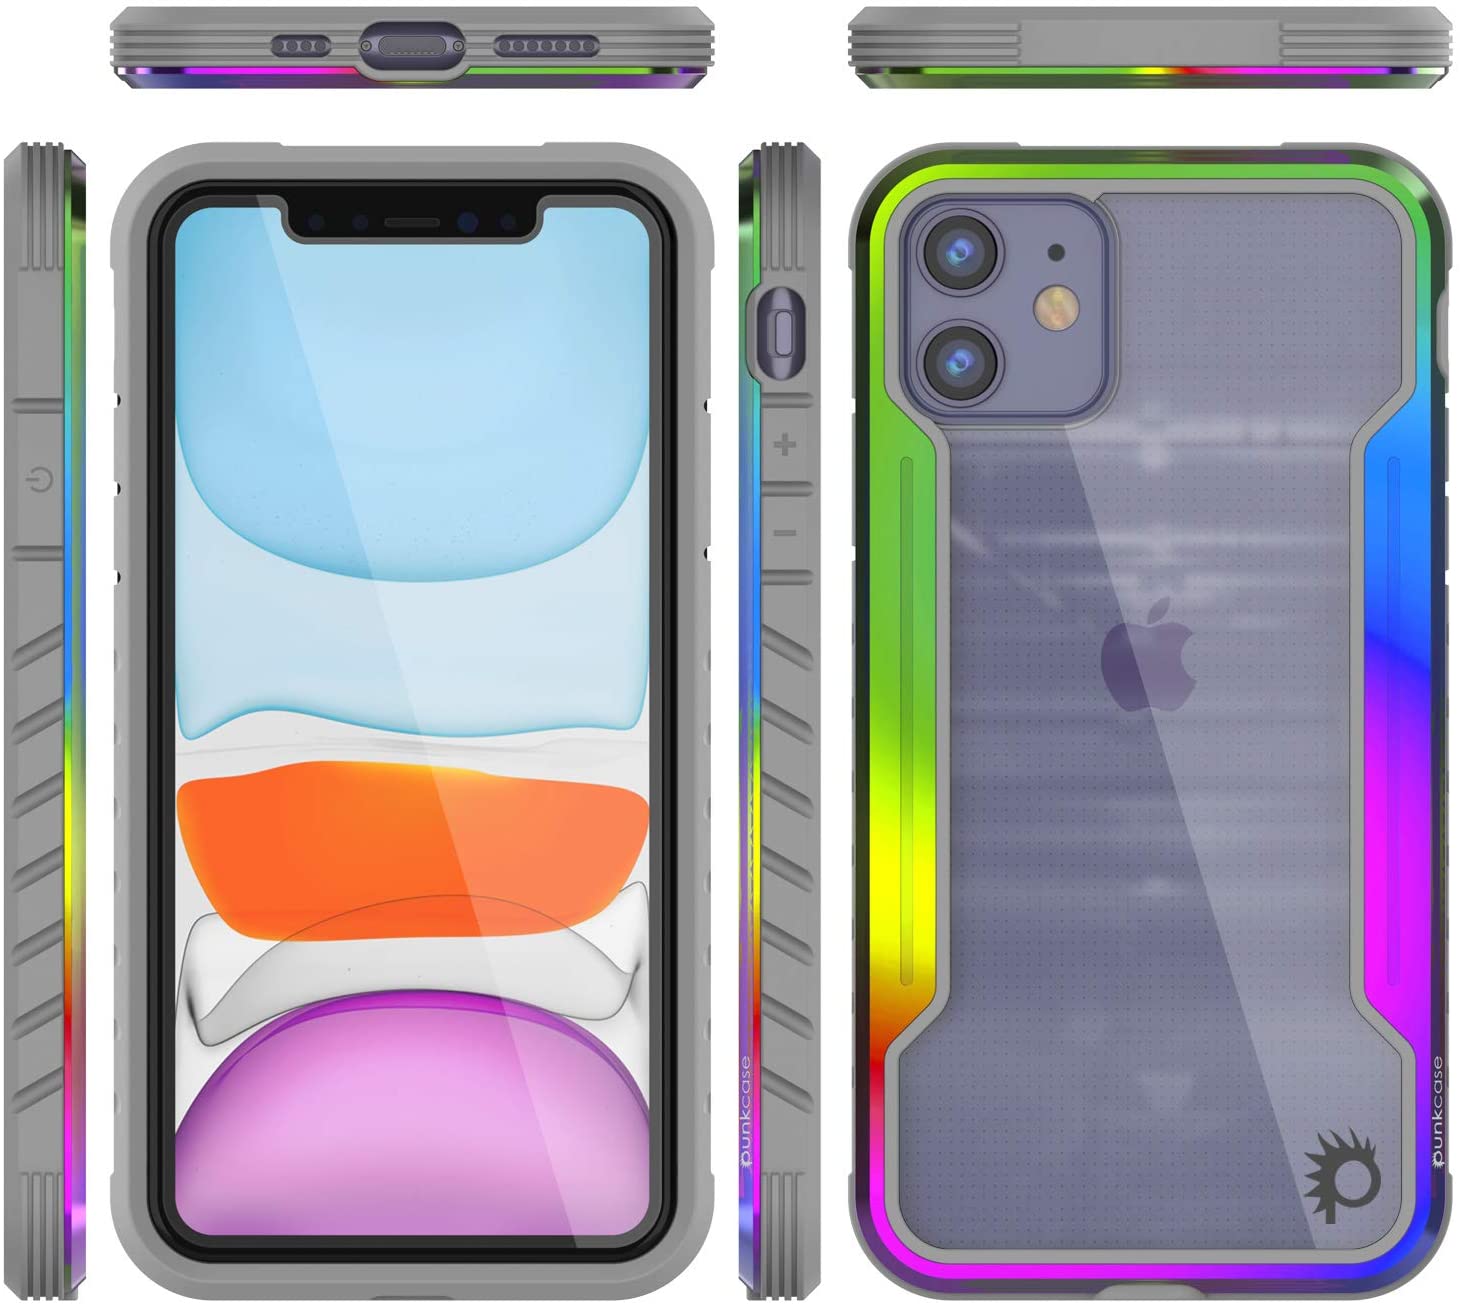 Punkcase iPhone 11 ravenger Case Protective Military Grade Multilayer Cover [Rainbow]